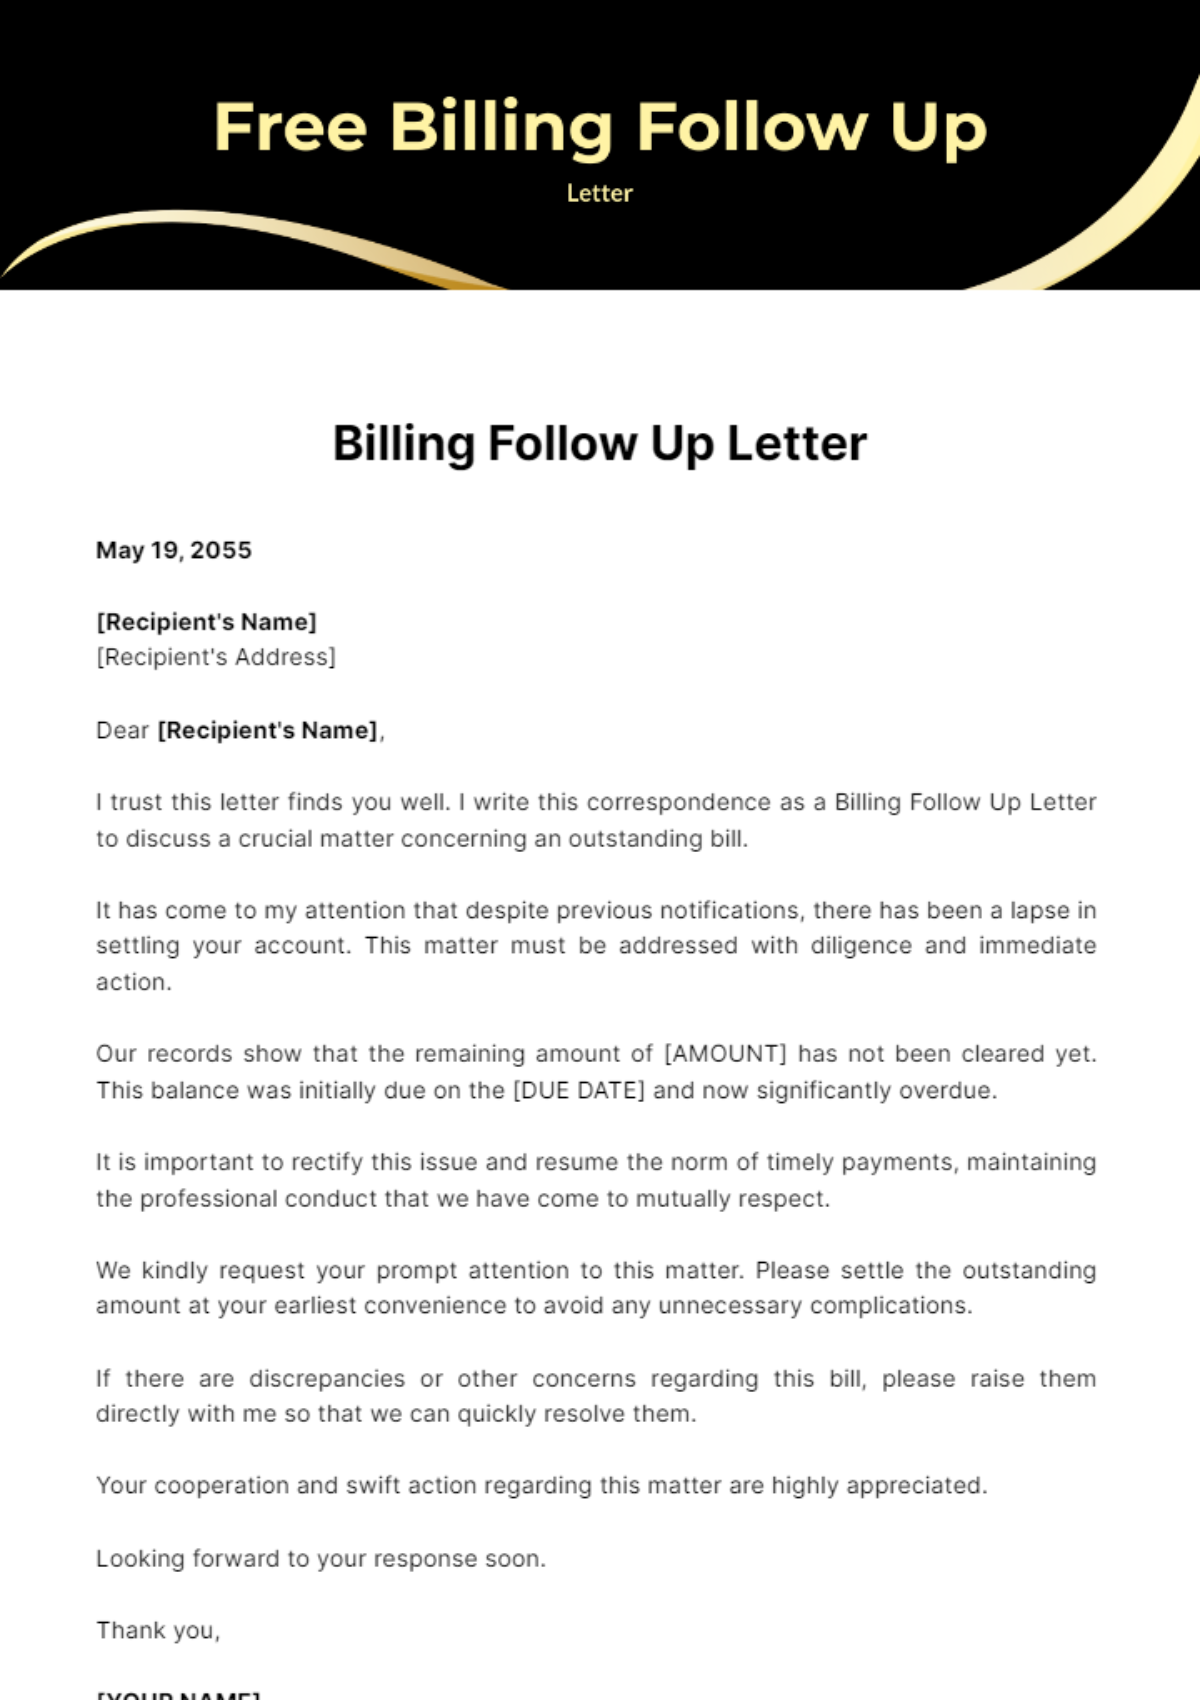 Free Billing Follow Up Letter Template